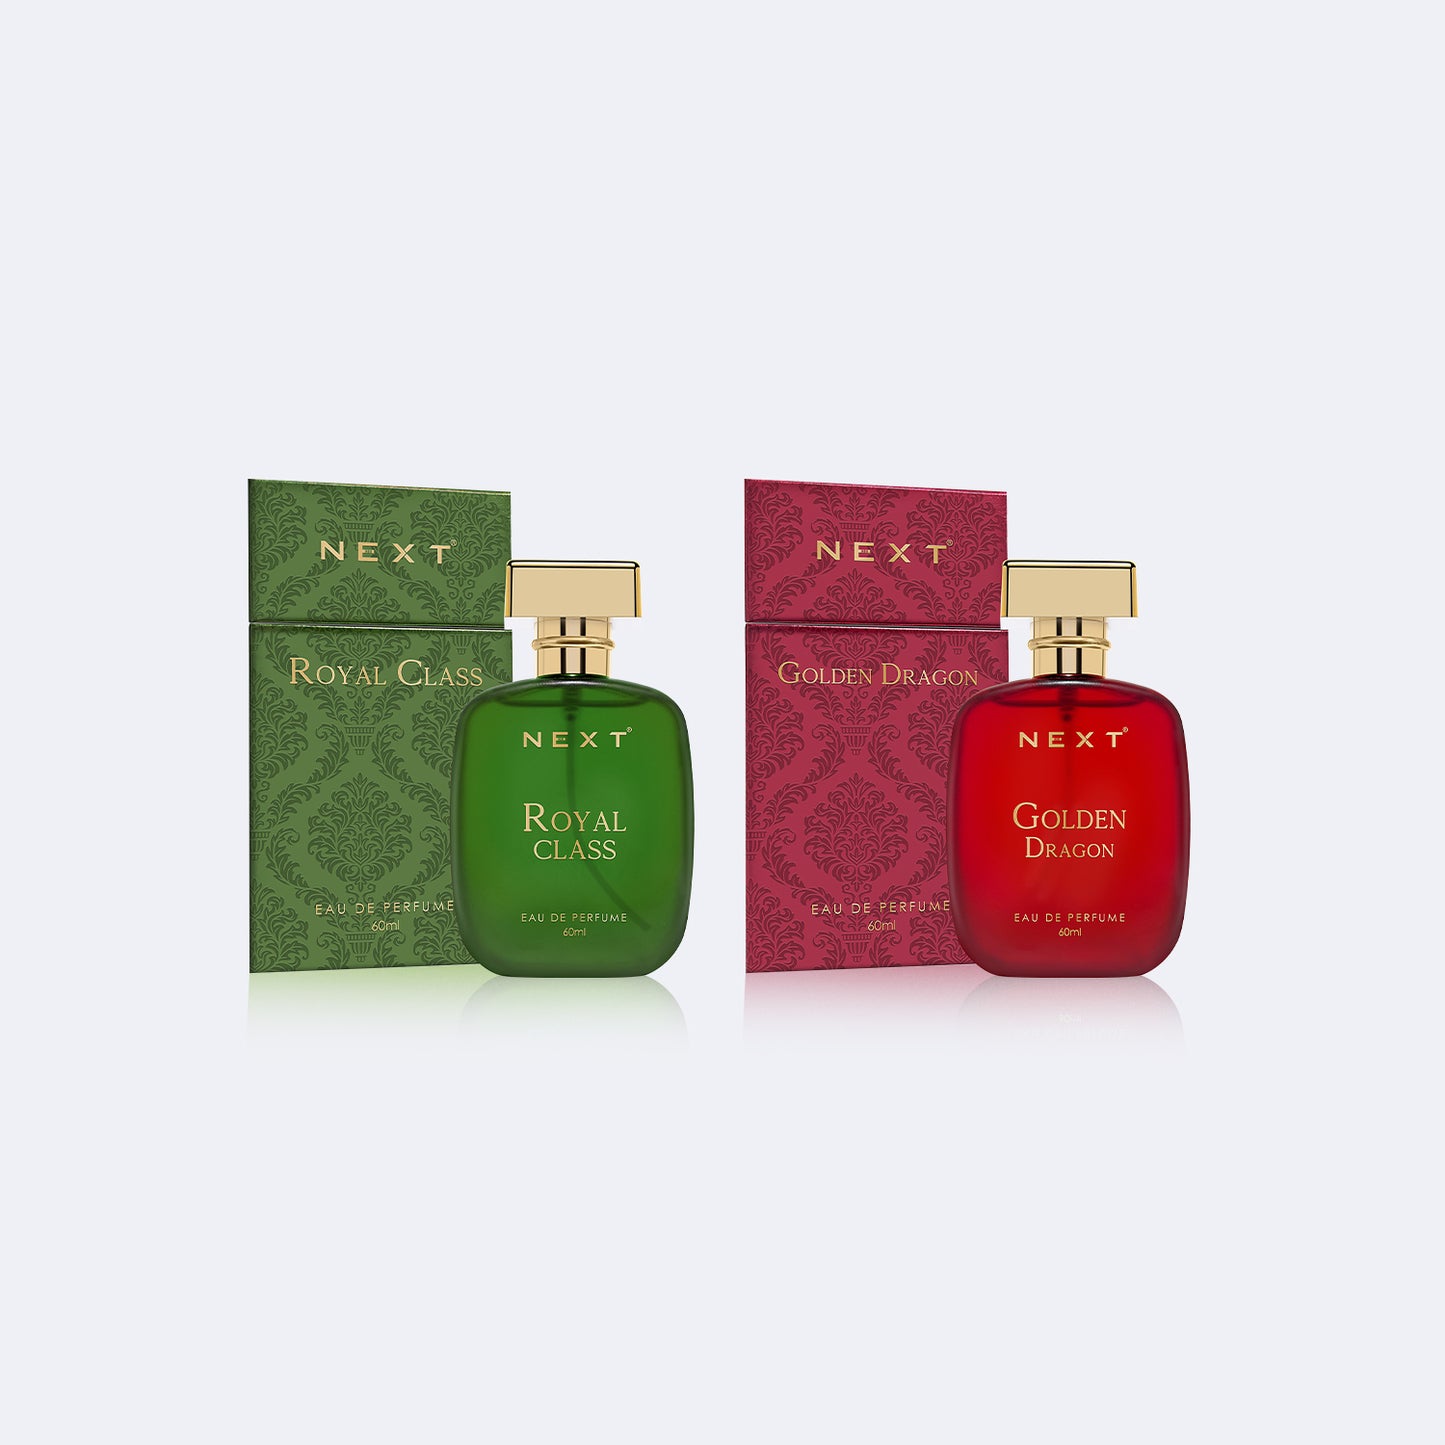 Next Luxury Combo Pack of 2 Perfume -Golden Dragon & Royal Class - 60ml Each